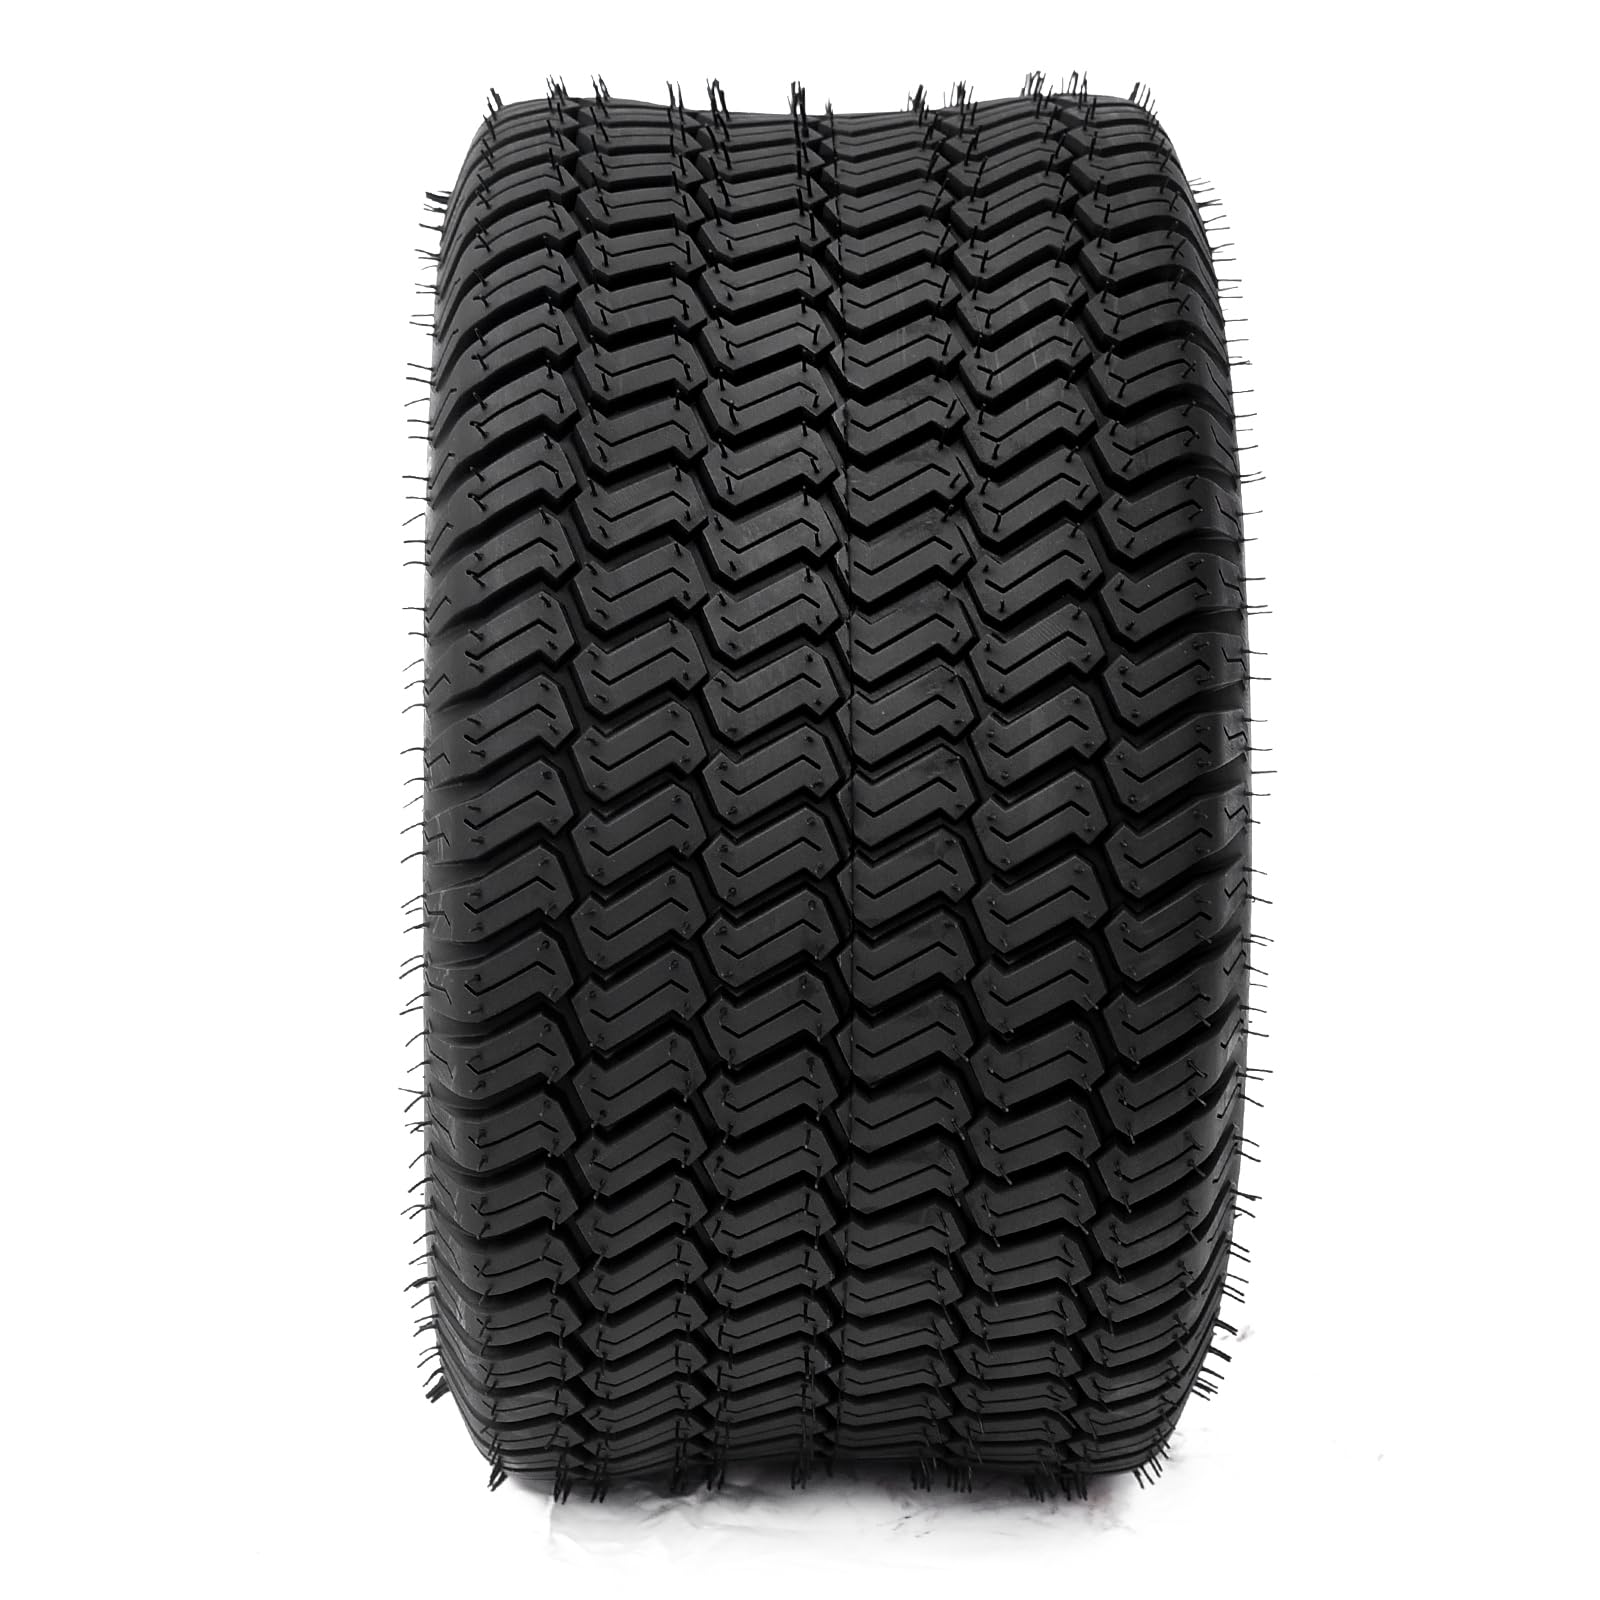 Lawn Mower Tires Turf Tires 20x8.00-8 4PR for Golf Cart Tires, Garden Tractor Riding Mower Tubeless Set of 2